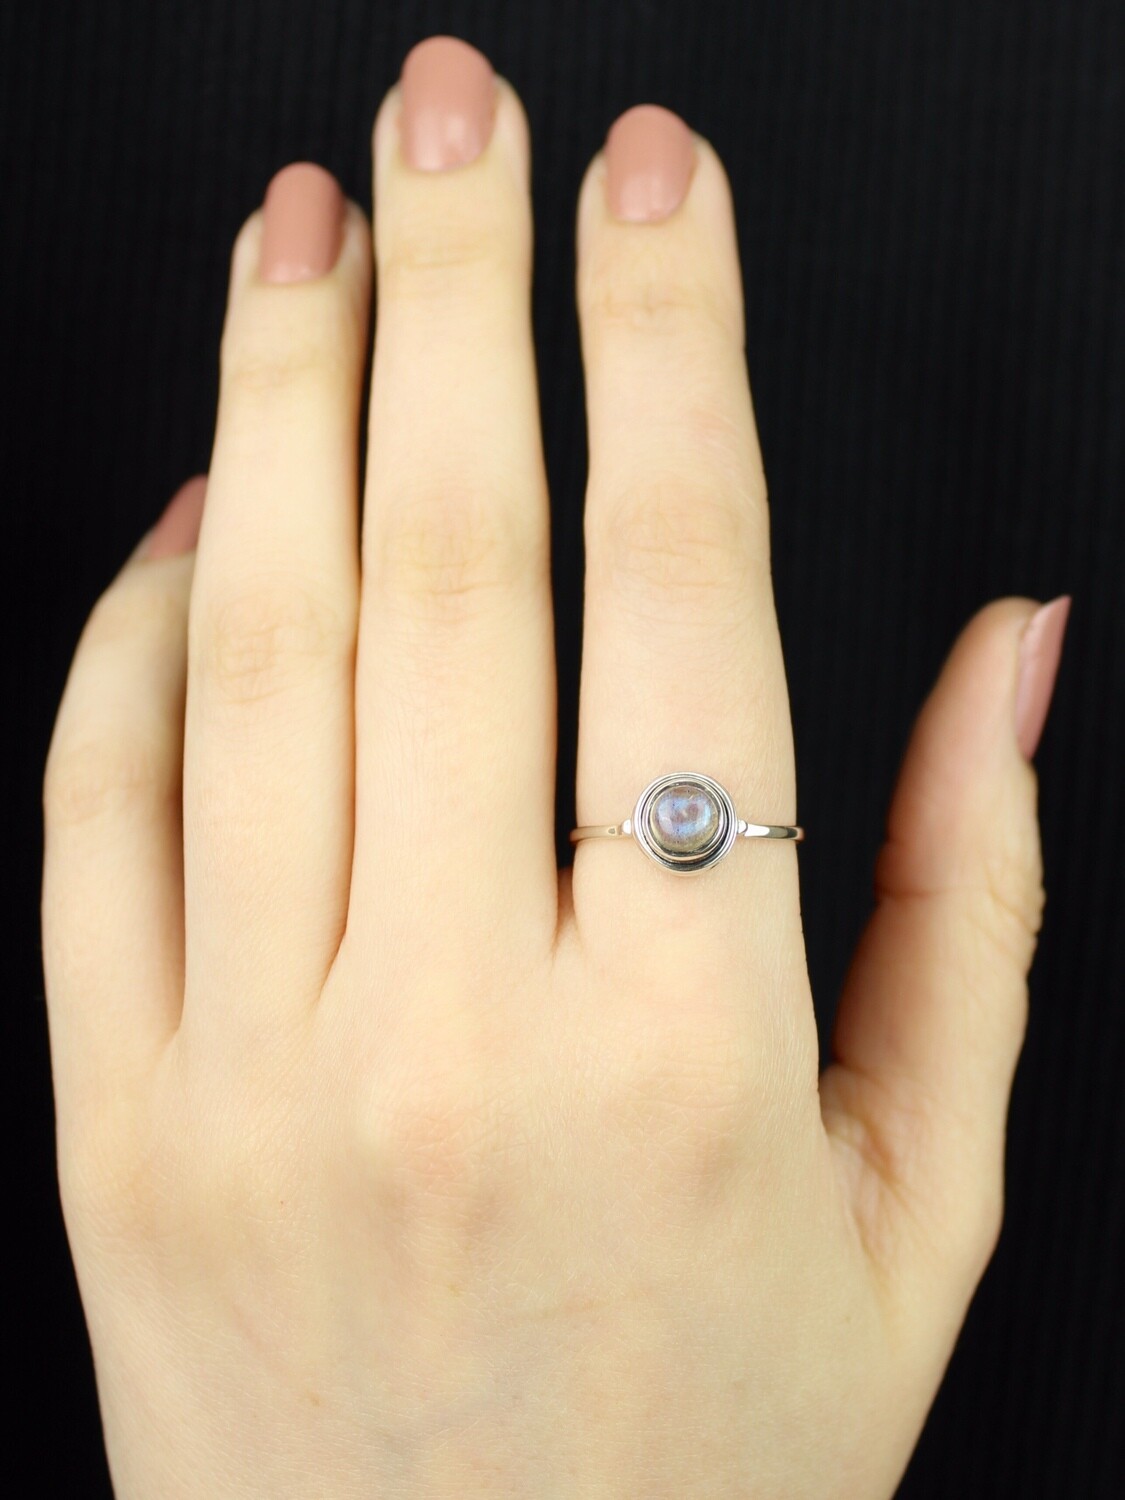 SIZE 10.25 - Sterling Silver Little Round Labradorite Ring - RIG10104